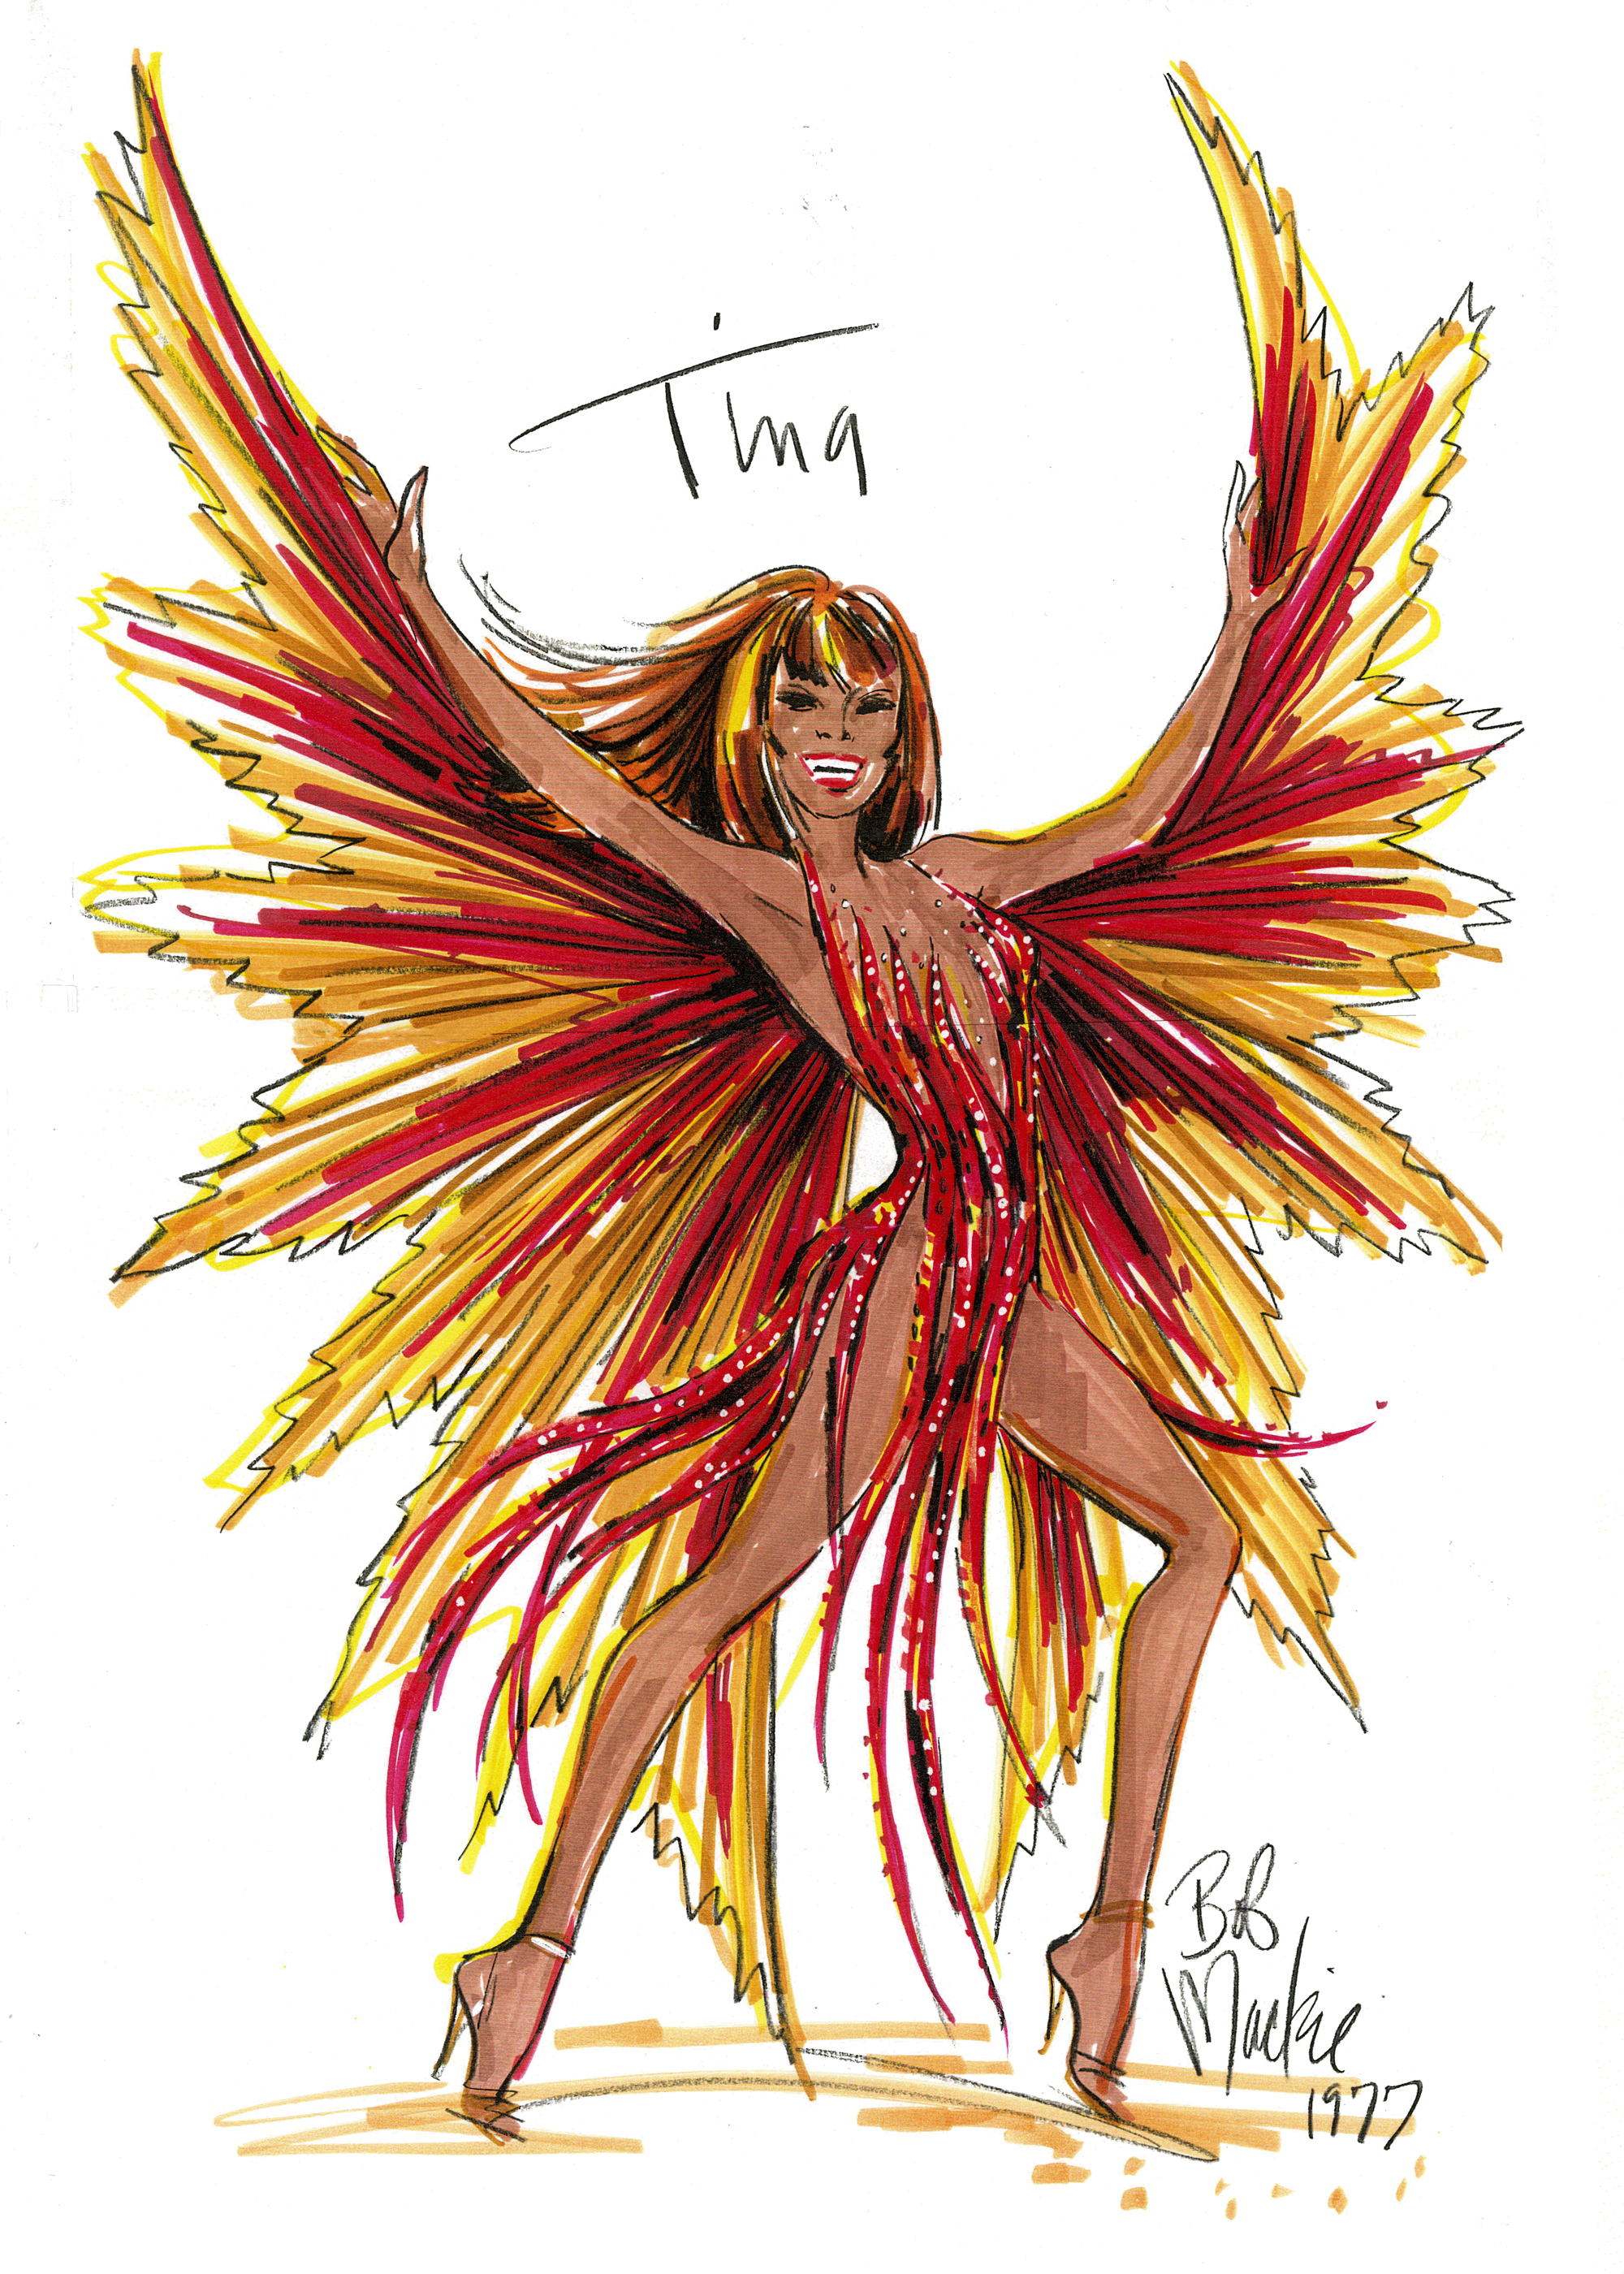 Sketch of Flame dress for Tina Turner by Bob Mackie, 1977